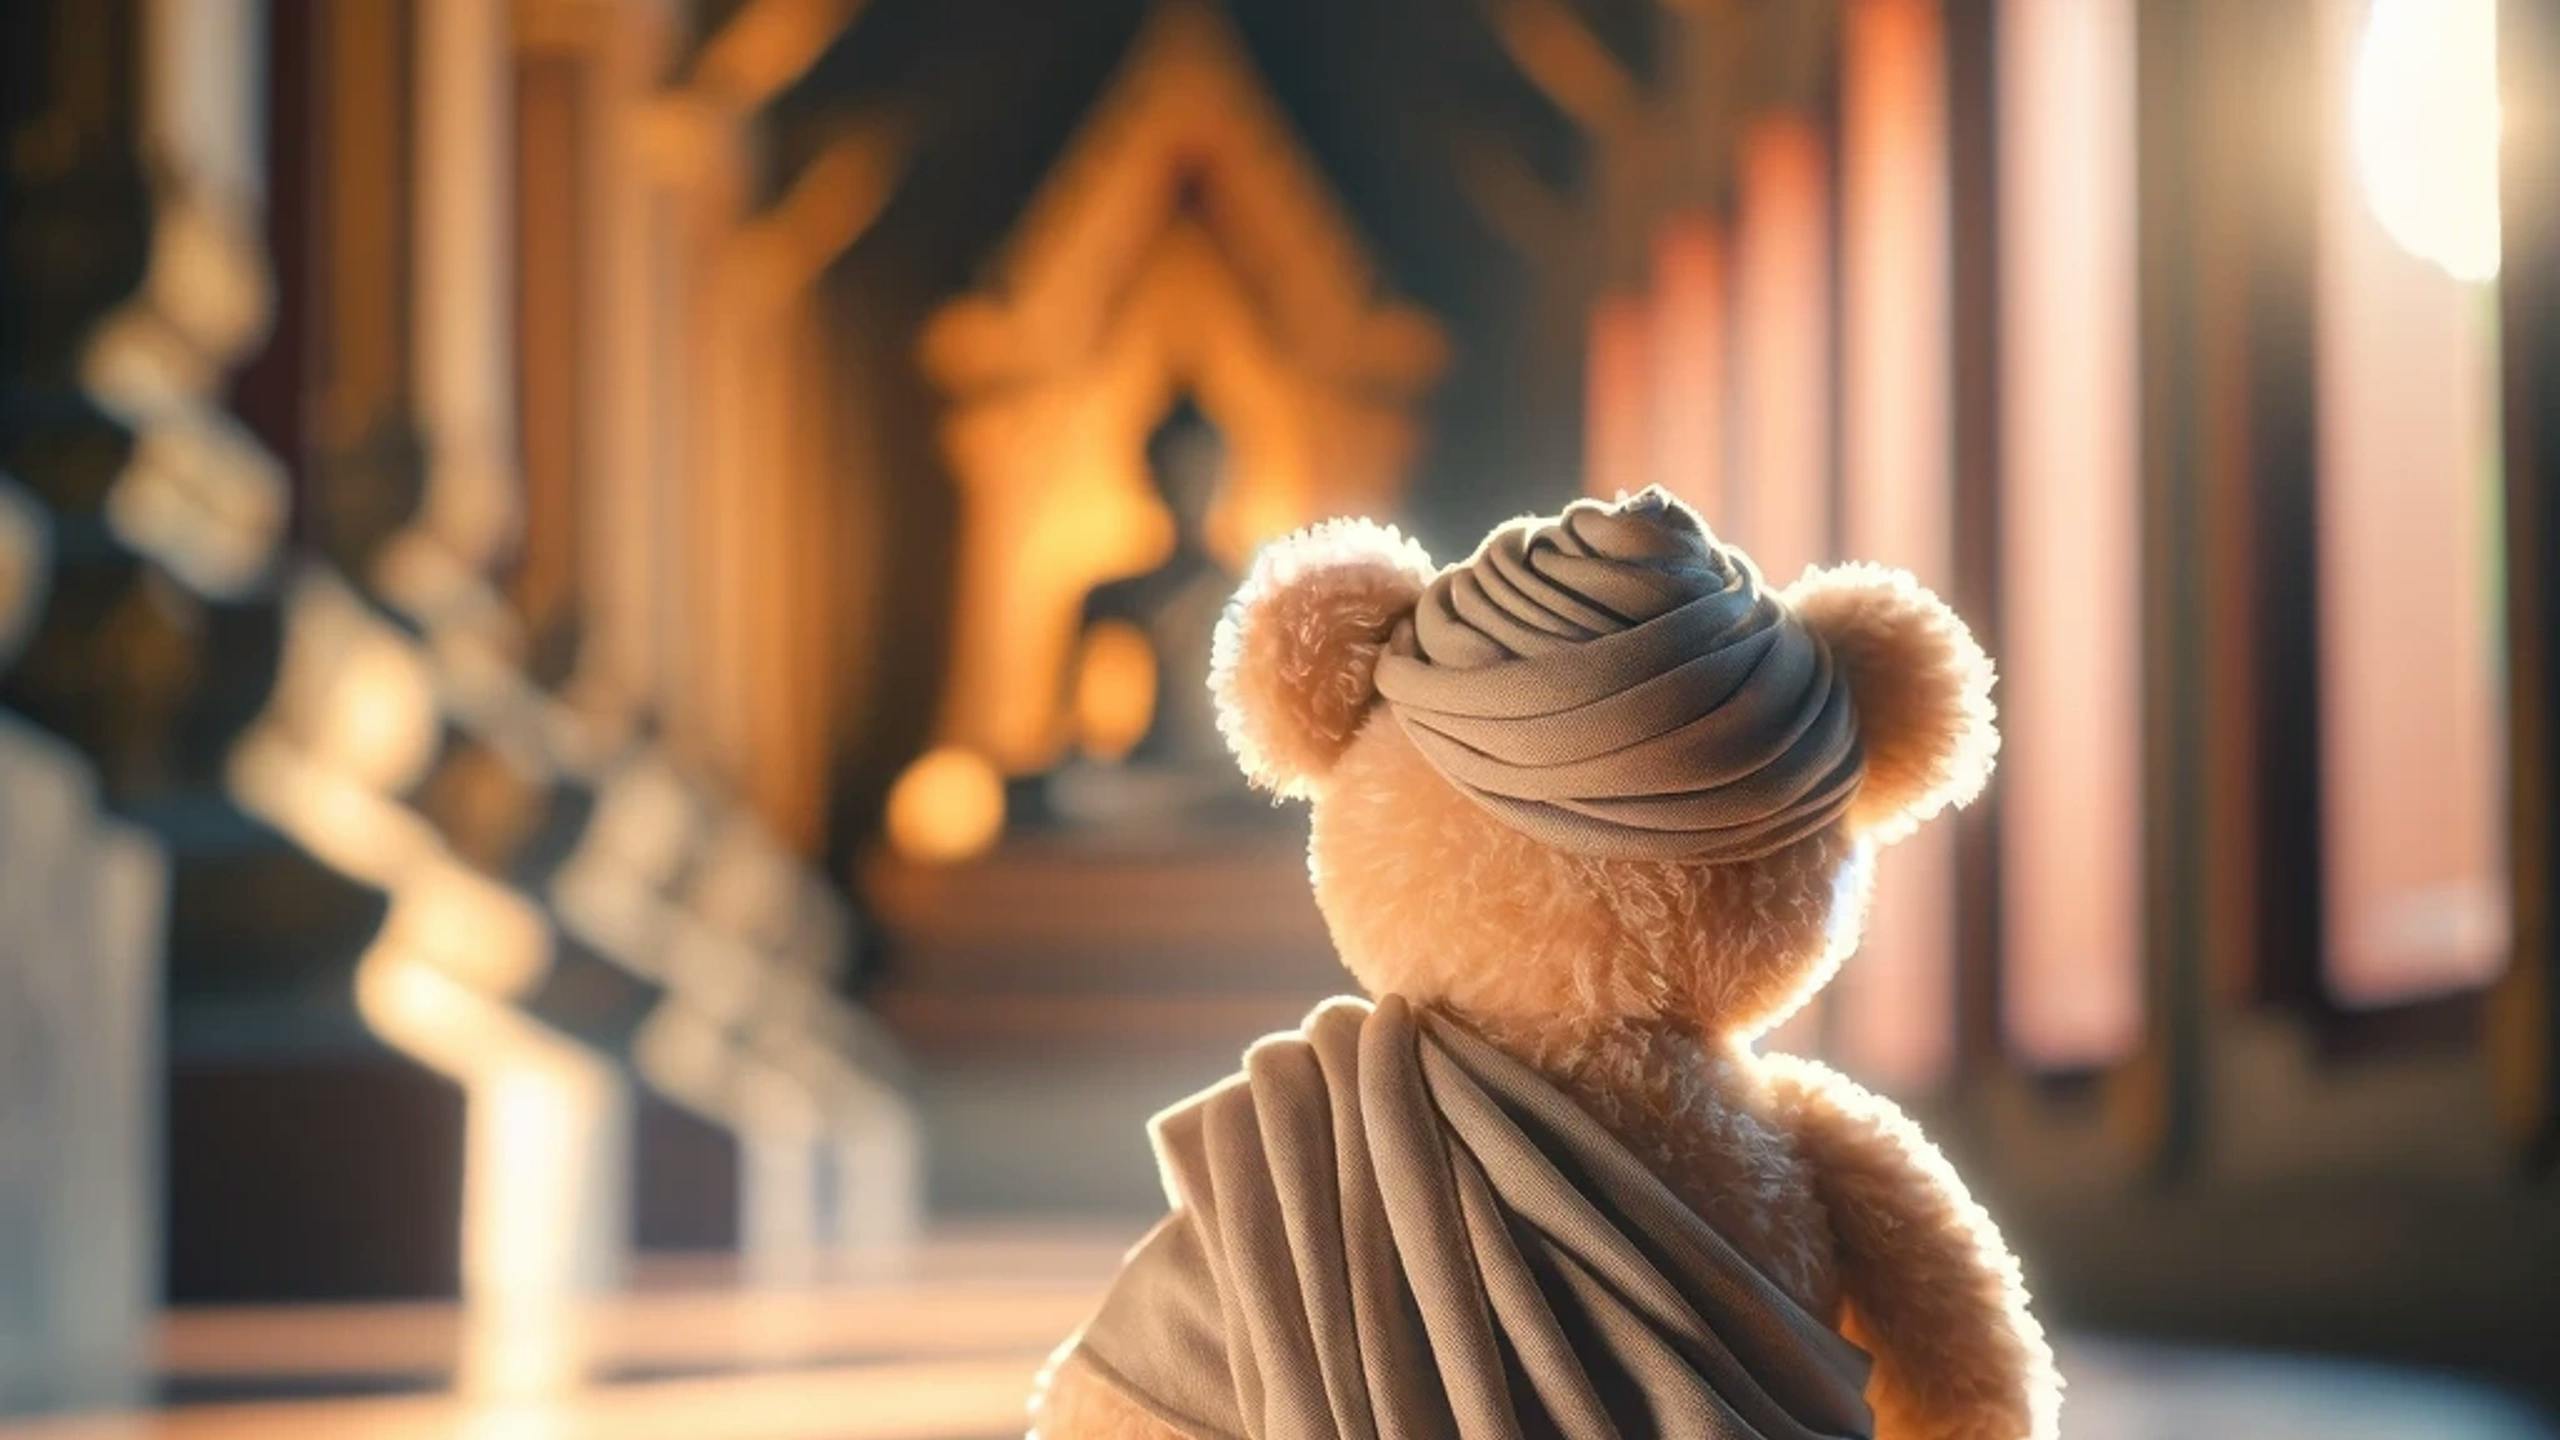 Bear as a monk meditating on mindfulness and focus